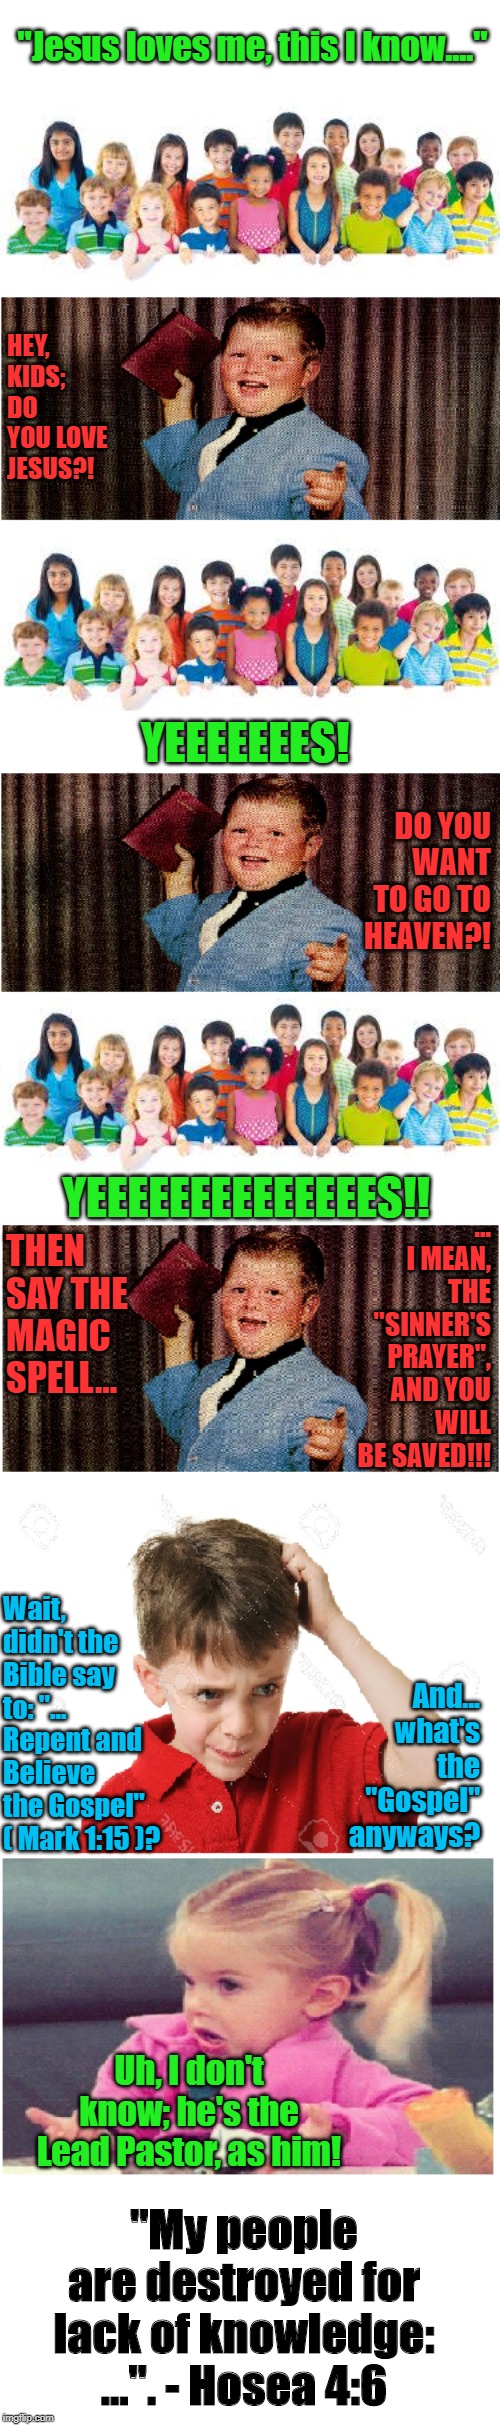 The Sinner's Prayer. | "Jesus loves me, this I know...."; HEY, KIDS; DO YOU LOVE JESUS?! YEEEEEEES! DO YOU WANT TO GO TO HEAVEN?! ... I MEAN, THE "SINNER'S PRAYER", AND YOU WILL BE SAVED!!! YEEEEEEEEEEEEEES!! THEN SAY THE MAGIC SPELL... Wait, didn't the Bible say to: "... Repent and Believe the Gospel" ( Mark 1:15 )? And... what's the "Gospel" anyways? Uh, I don't know; he's the Lead Pastor, as him! "My people are destroyed for lack of knowledge: ...". - Hosea 4:6 | image tagged in memes,bible,gospel,salvation,heresy,prayer | made w/ Imgflip meme maker